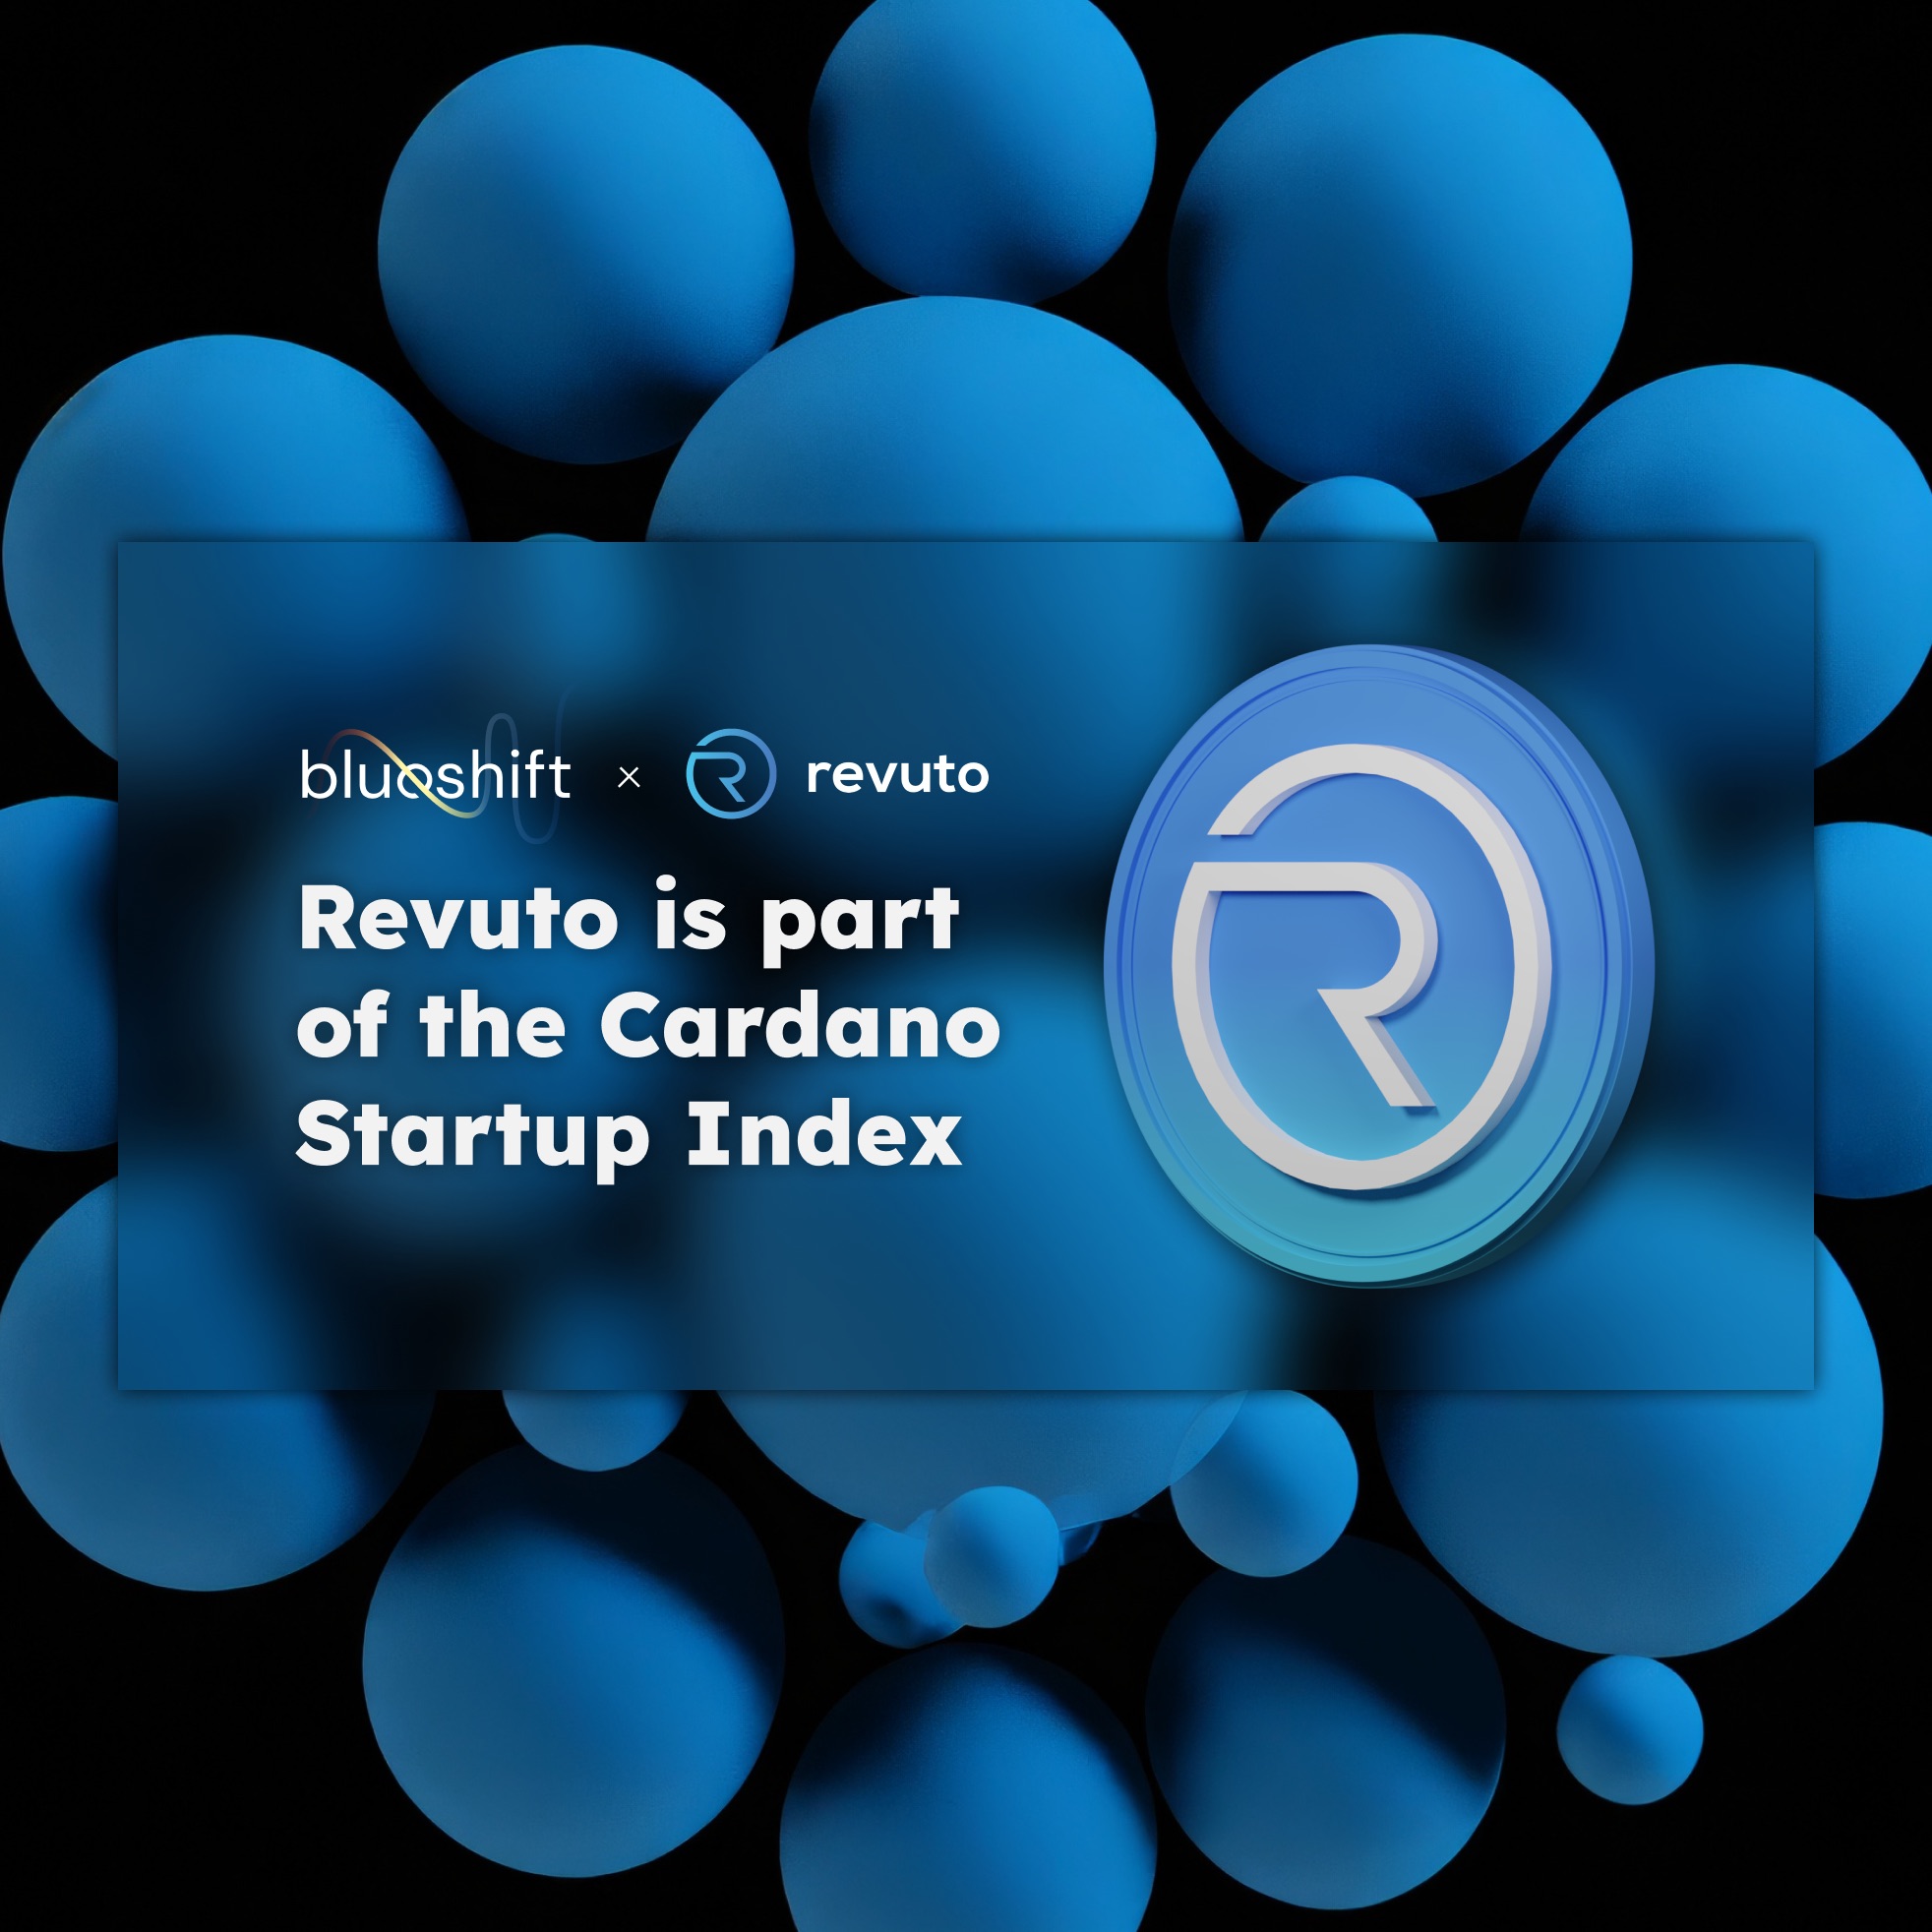 Introducing Revuto to the Cardano Startup Index